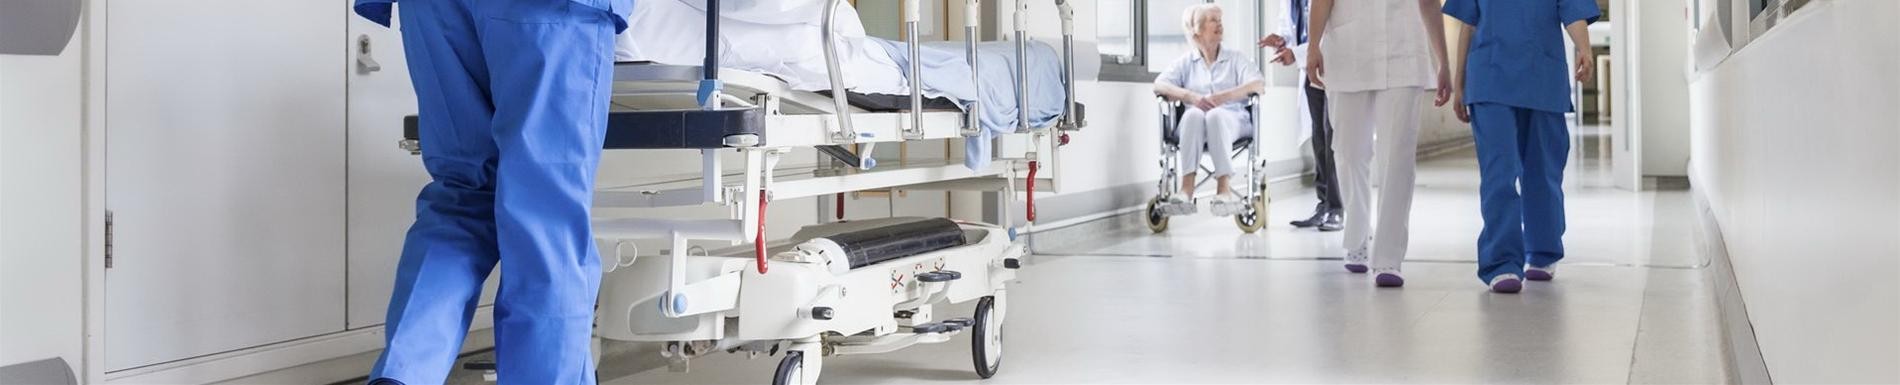 Hospitals Canopy and Duck Cleaning Services Ireland